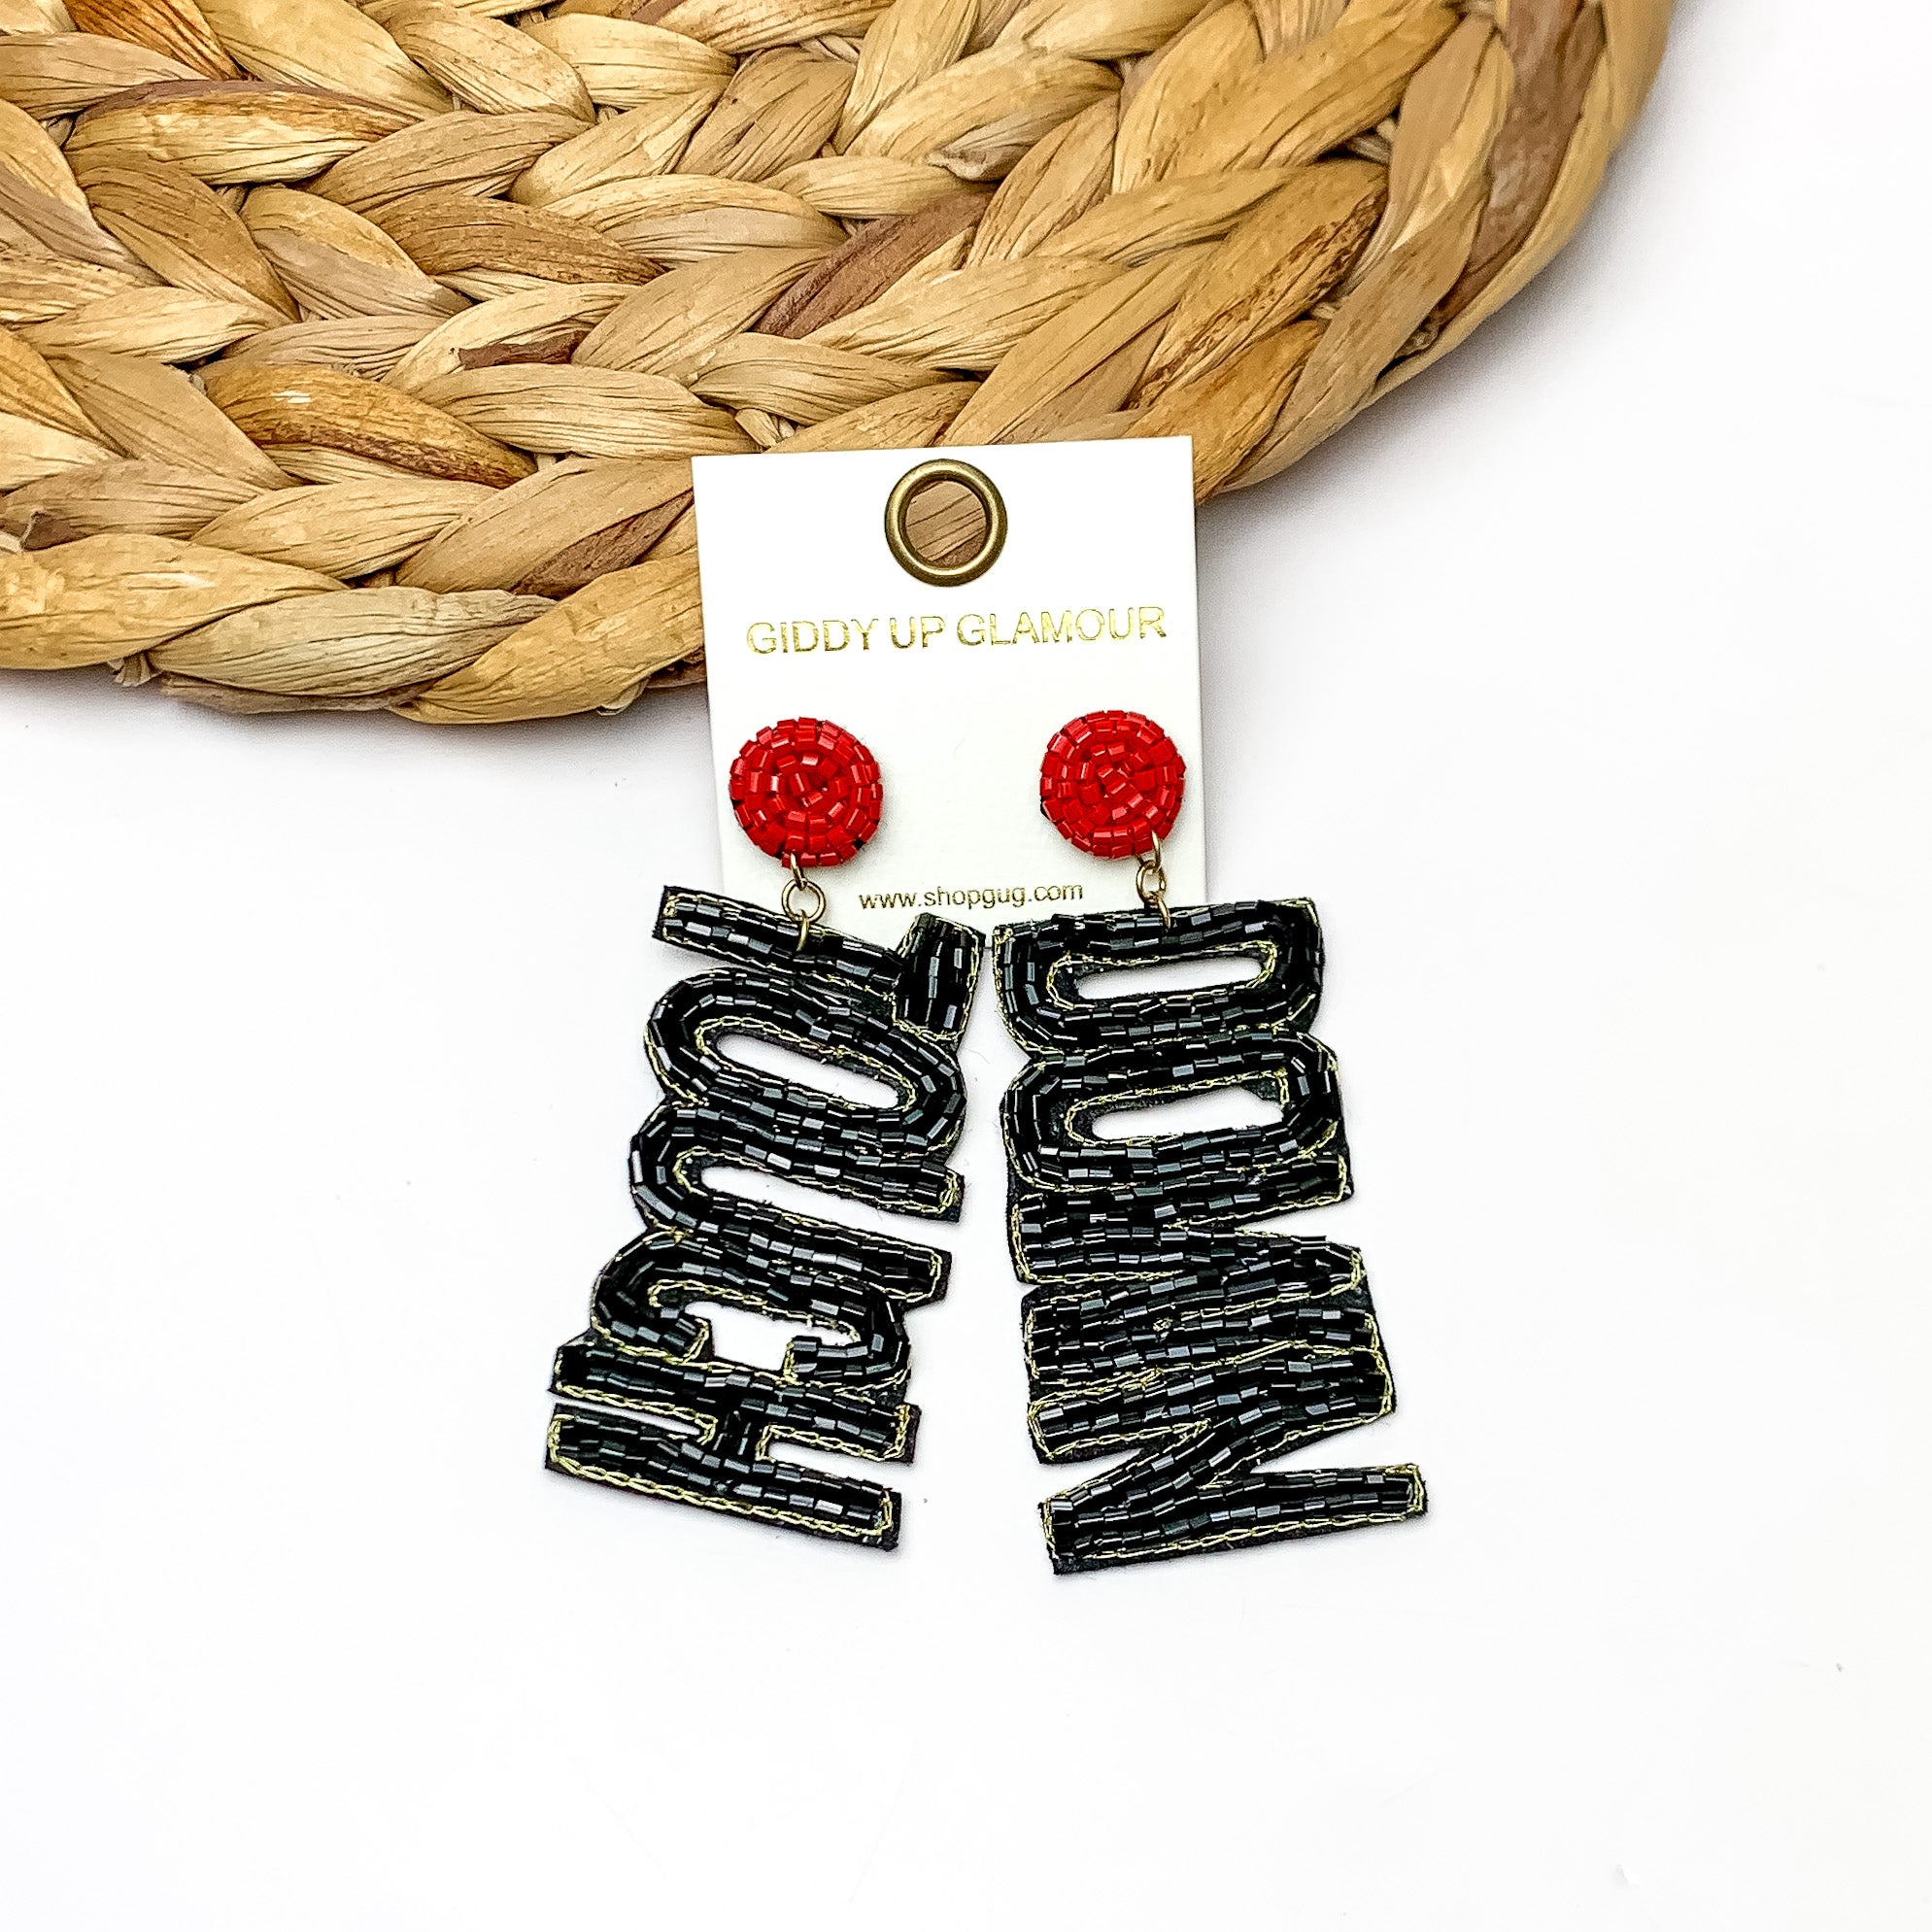 Beaded Touch Down Post Back Earrings in Black and Red. The earrings are laying against a woven piece. The background of the picture is white.